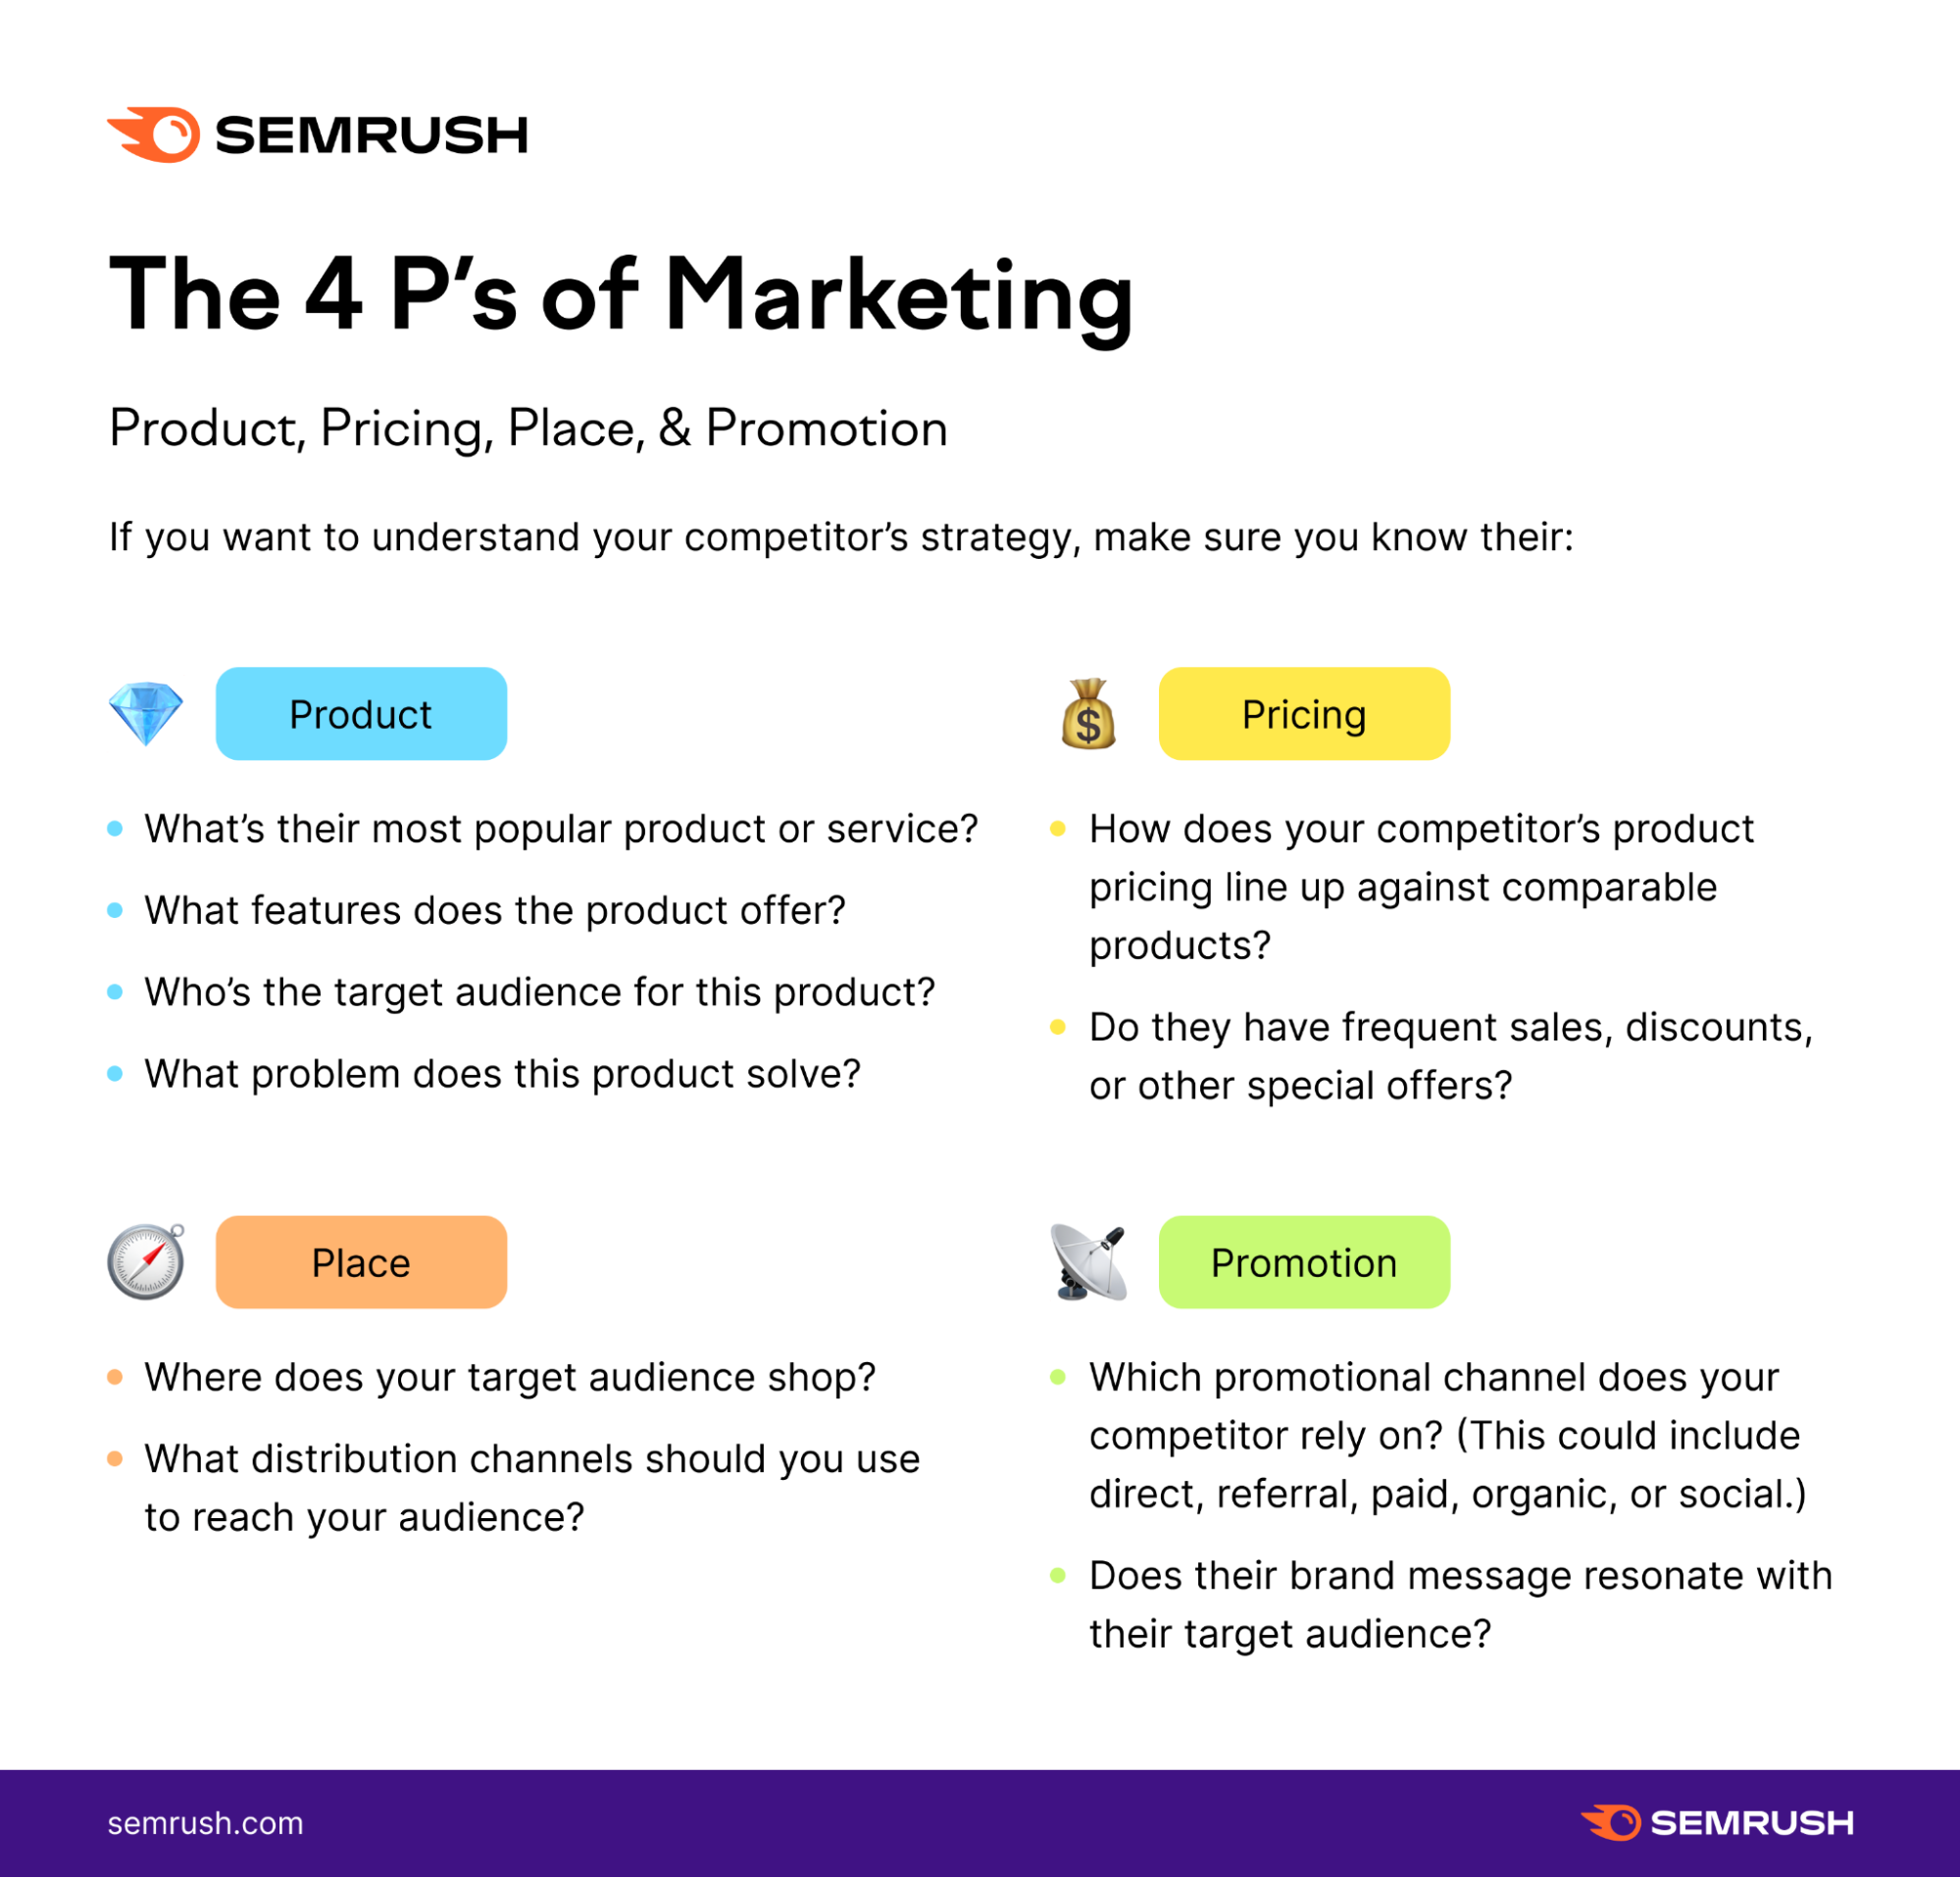 The 4 Ps of Marketing explained